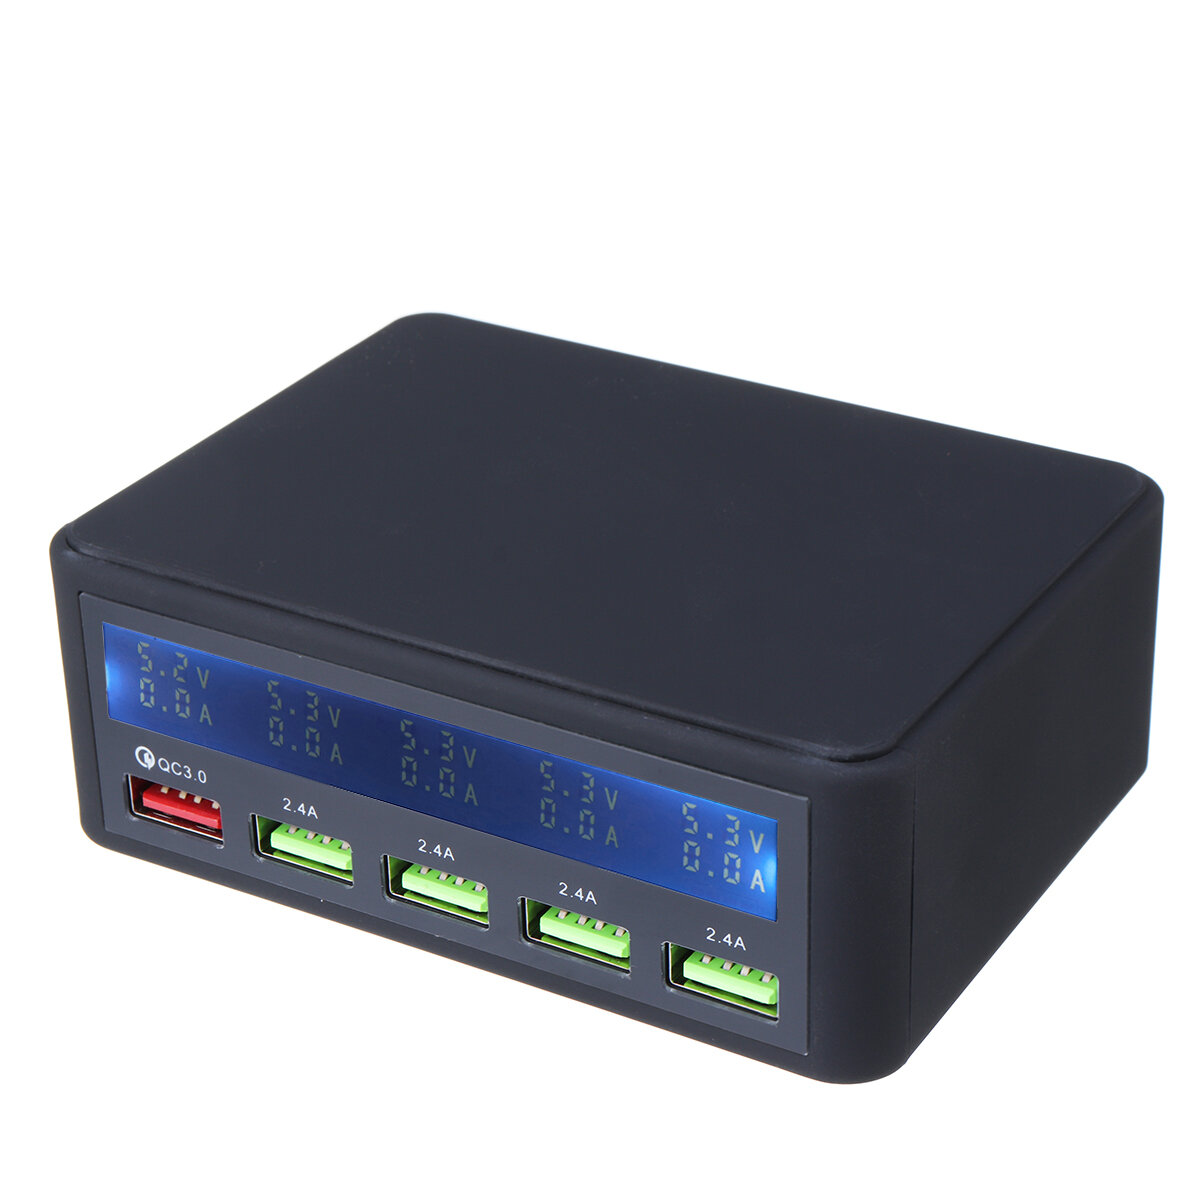 

AC100-240V Quick Charge QC3.0 Smart 5 Port USB Charger 5V 10A Power Adapter Lcd Display Station